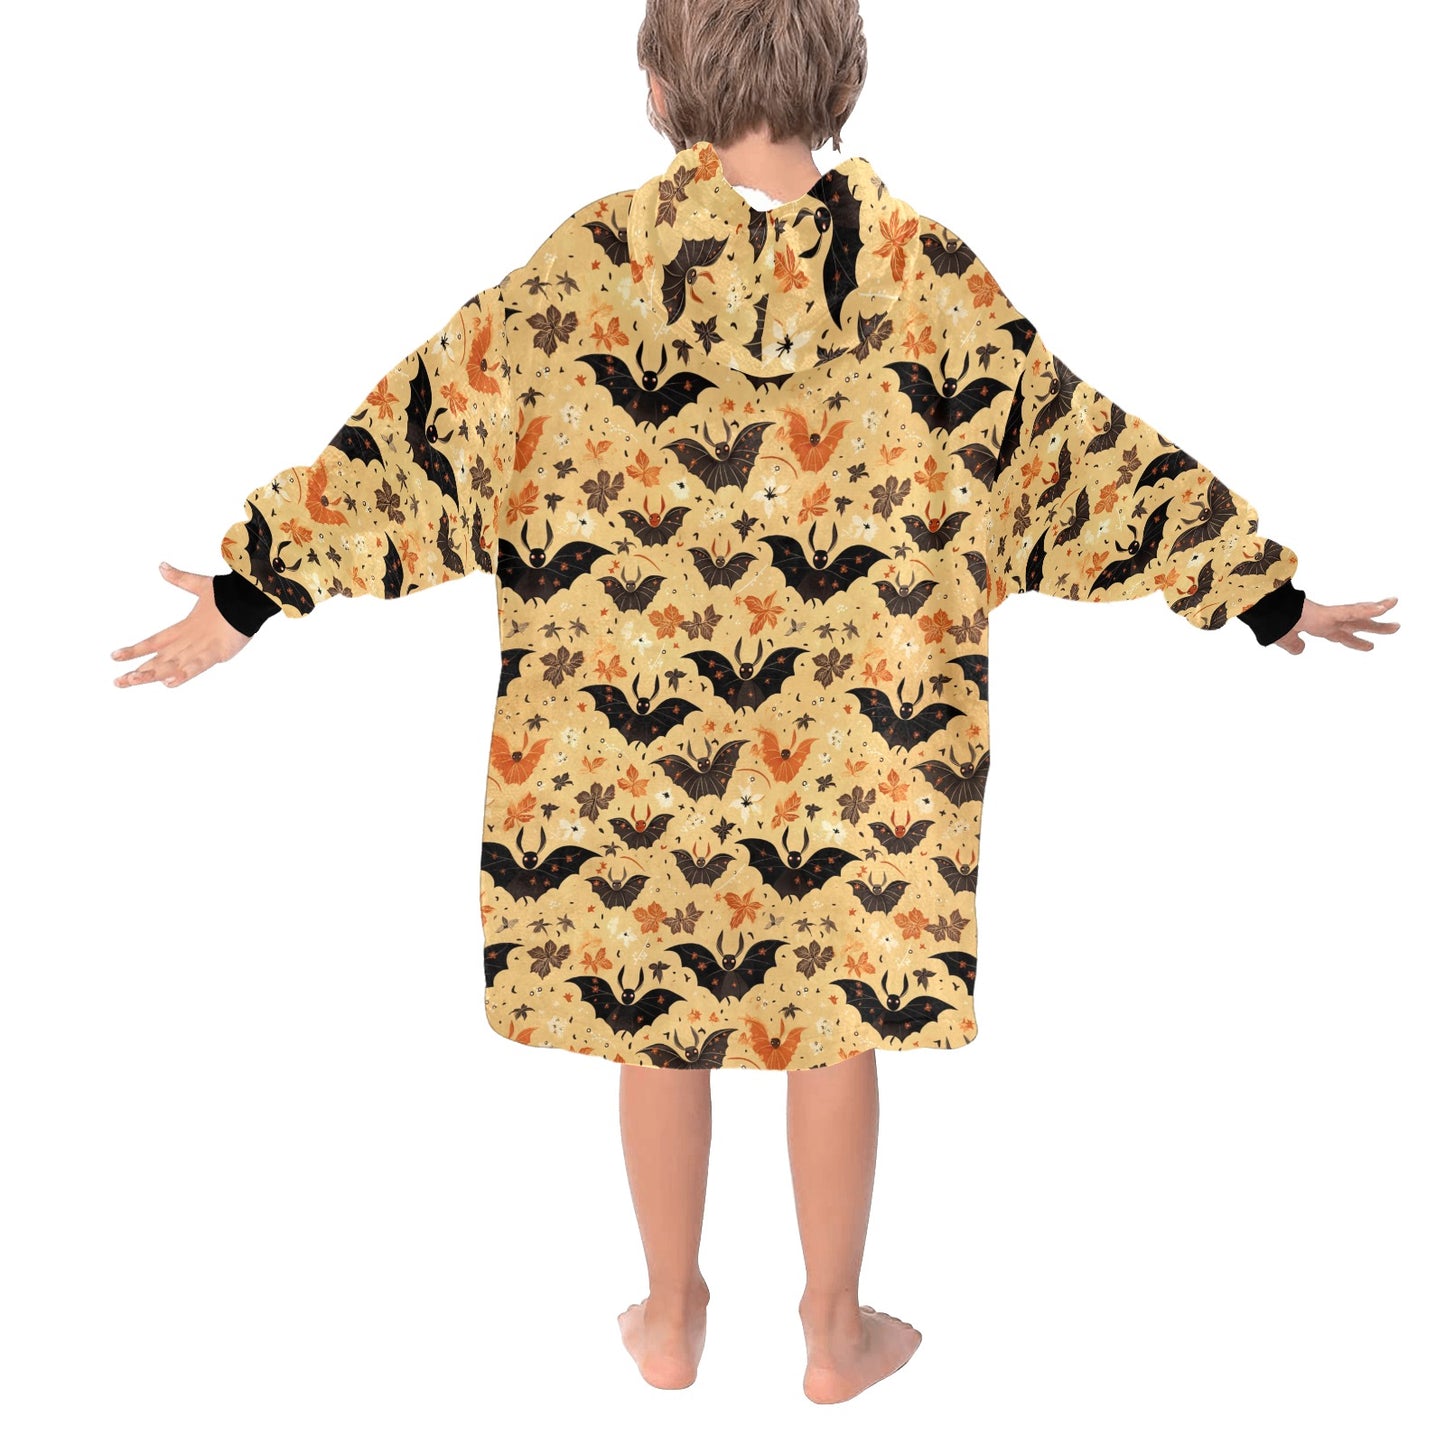 Wrap yourself in Halloween magic with this bat-themed fleece hooded warm blanket, ideal for staying warm and in the spooky spirit.